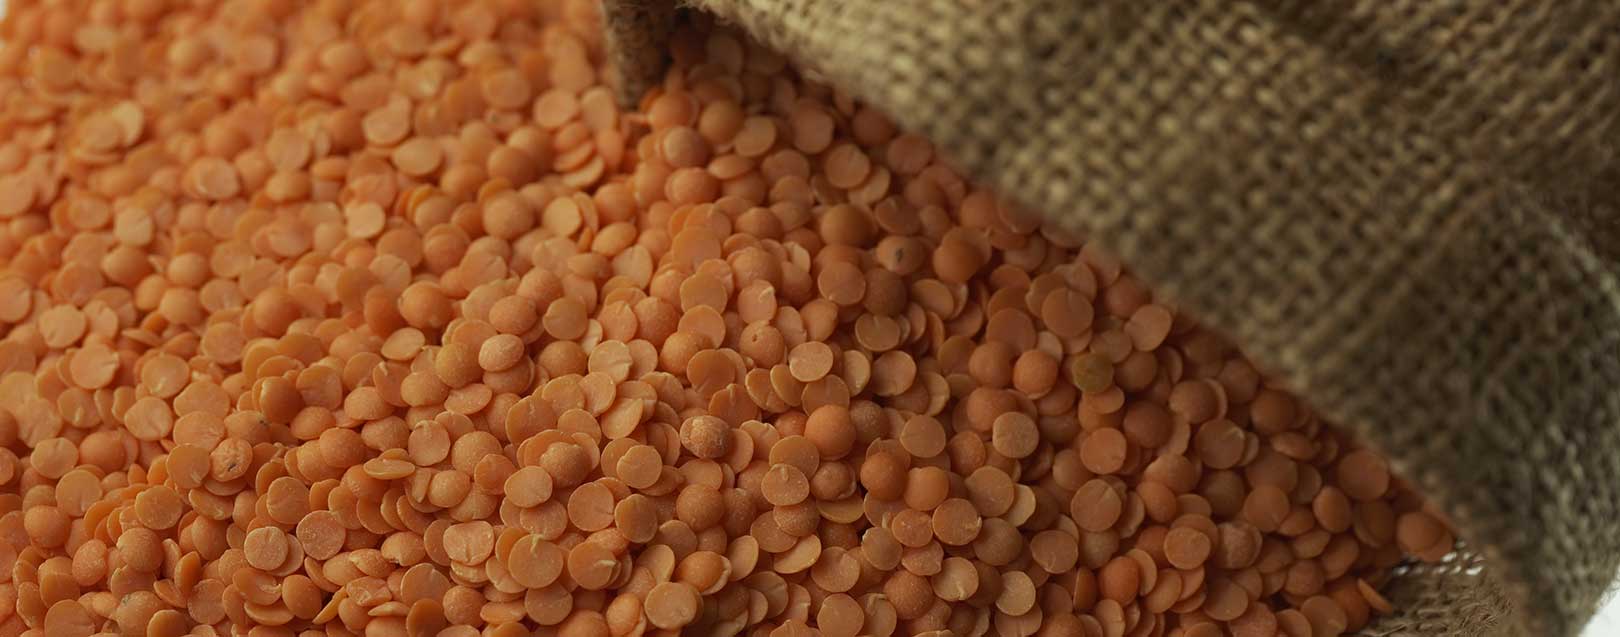 India expects long-term pulses supply from Mozambique